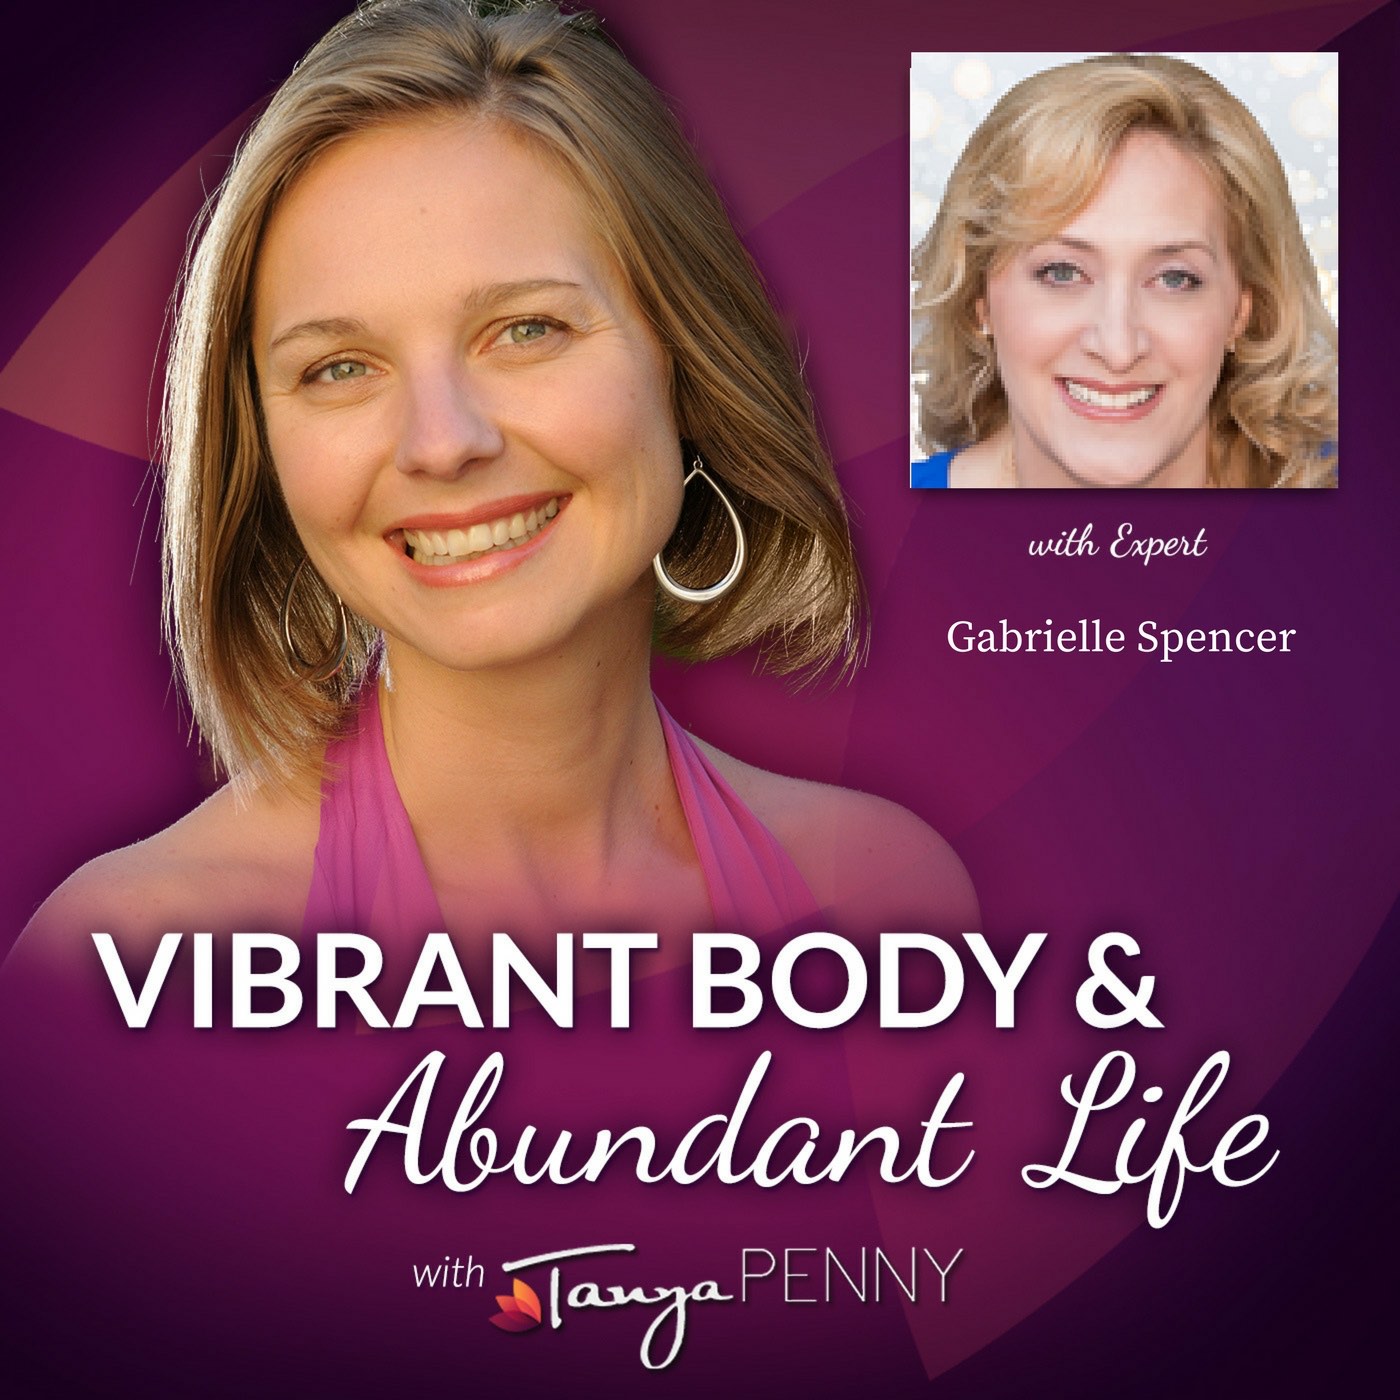 Your Divine Desires with Gabrielle Spencer